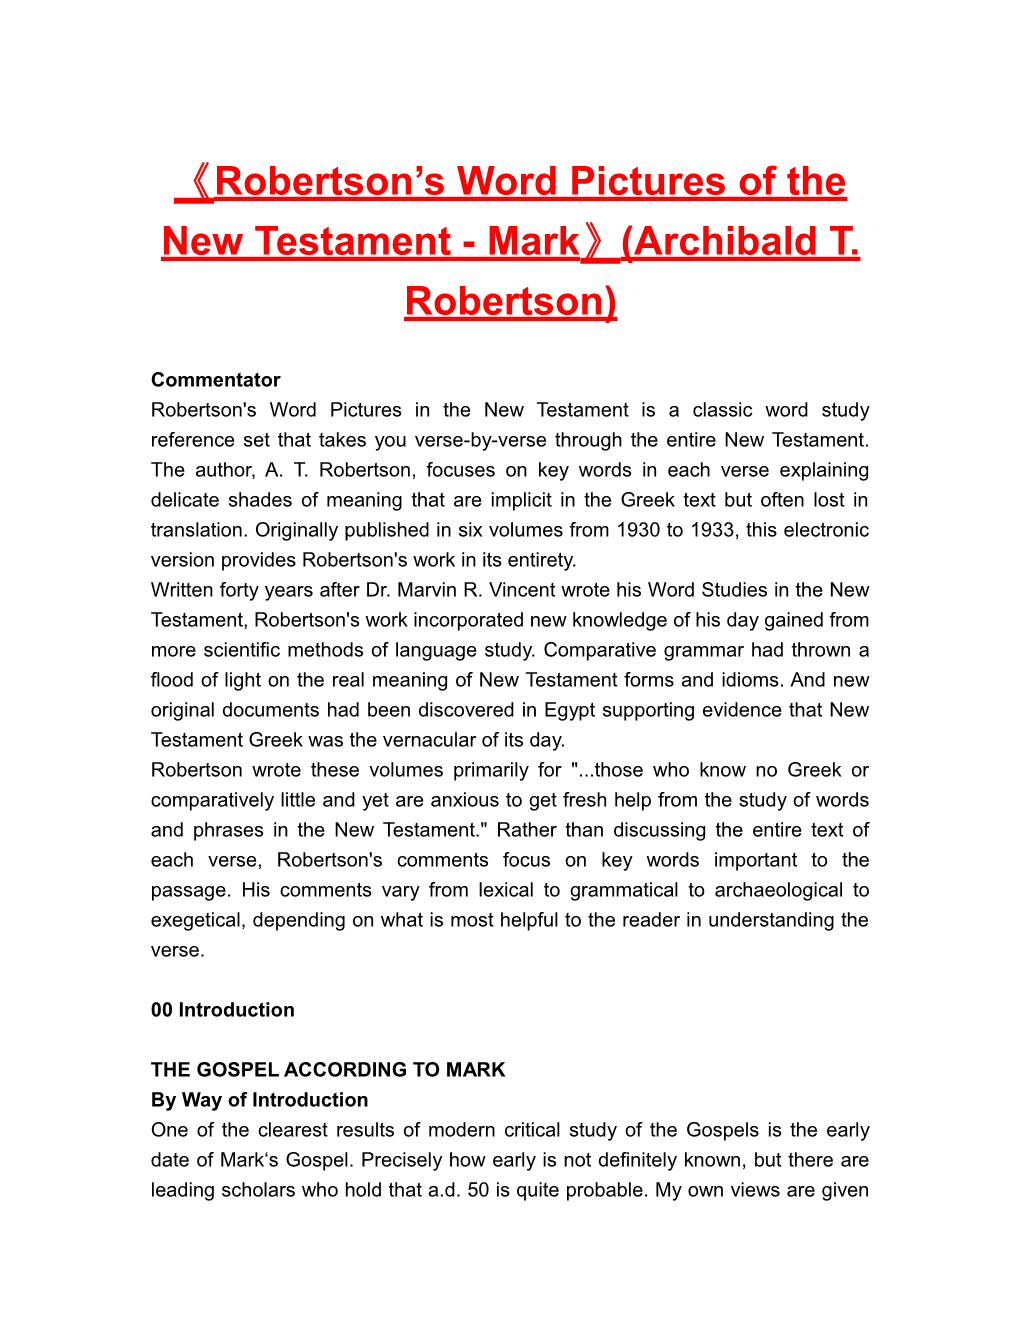 Robertson Sword Pictures of the New Testament-Mark (Archibald T. Robertson)